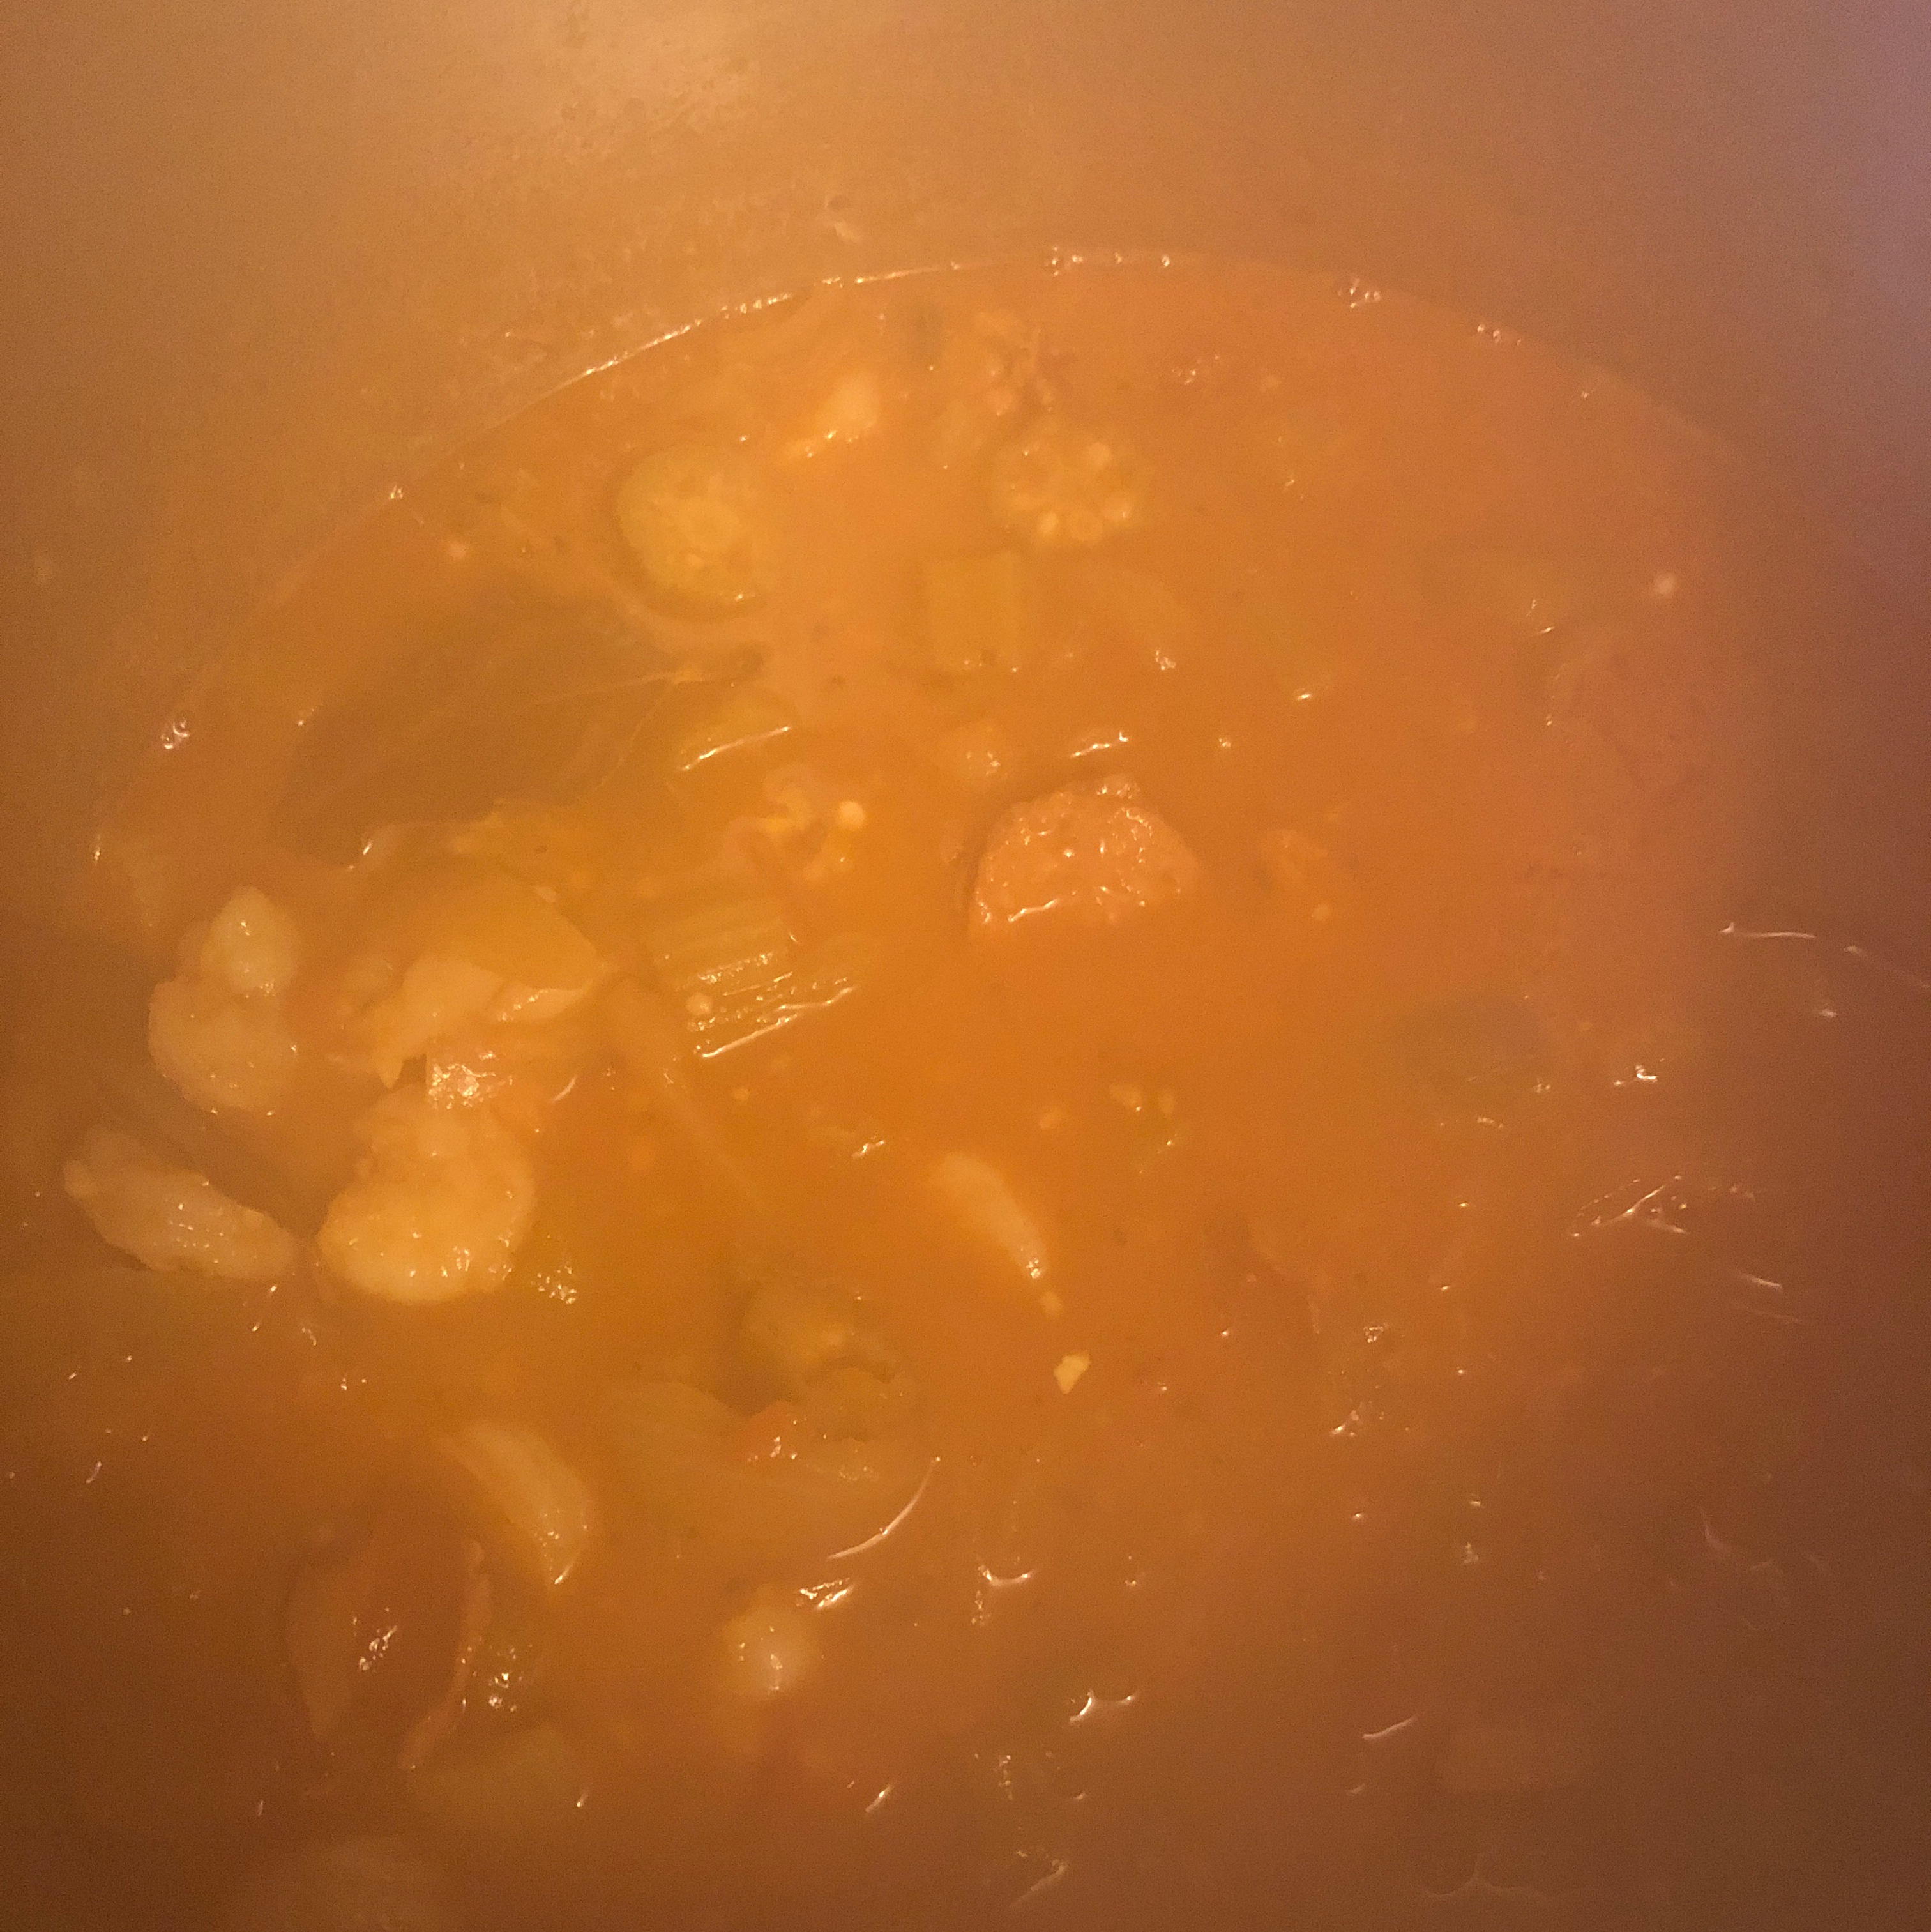 Roux-Based Authentic Seafood Gumbo with Okra red1967